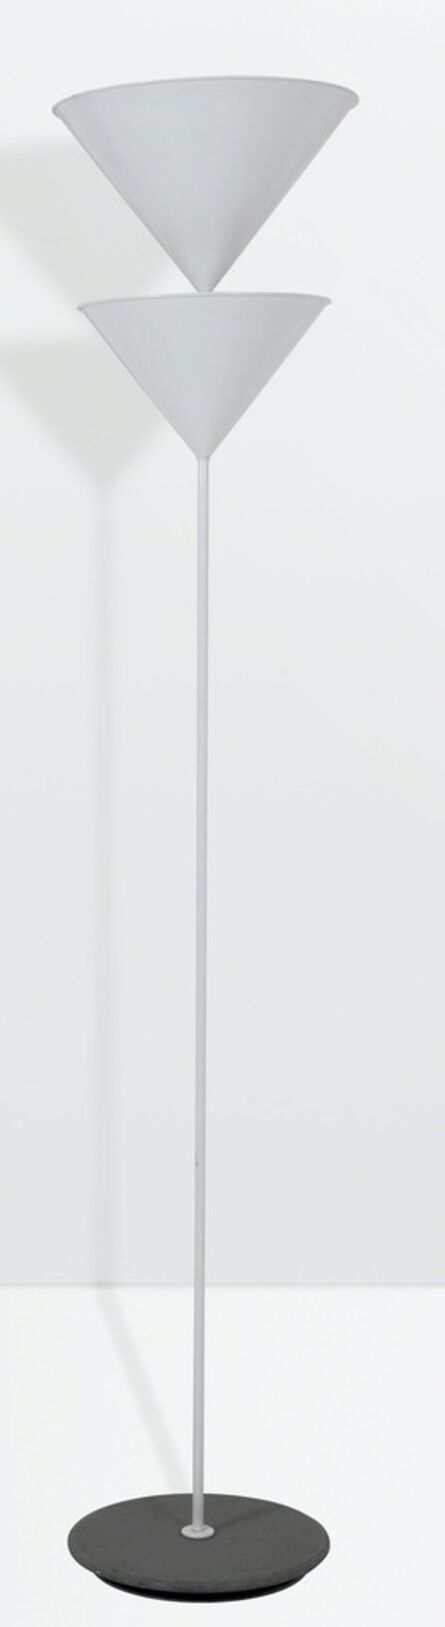 Vico Magistretti, ‘a Pascal floor lamp with a lacquered aluminum structure’, 1979